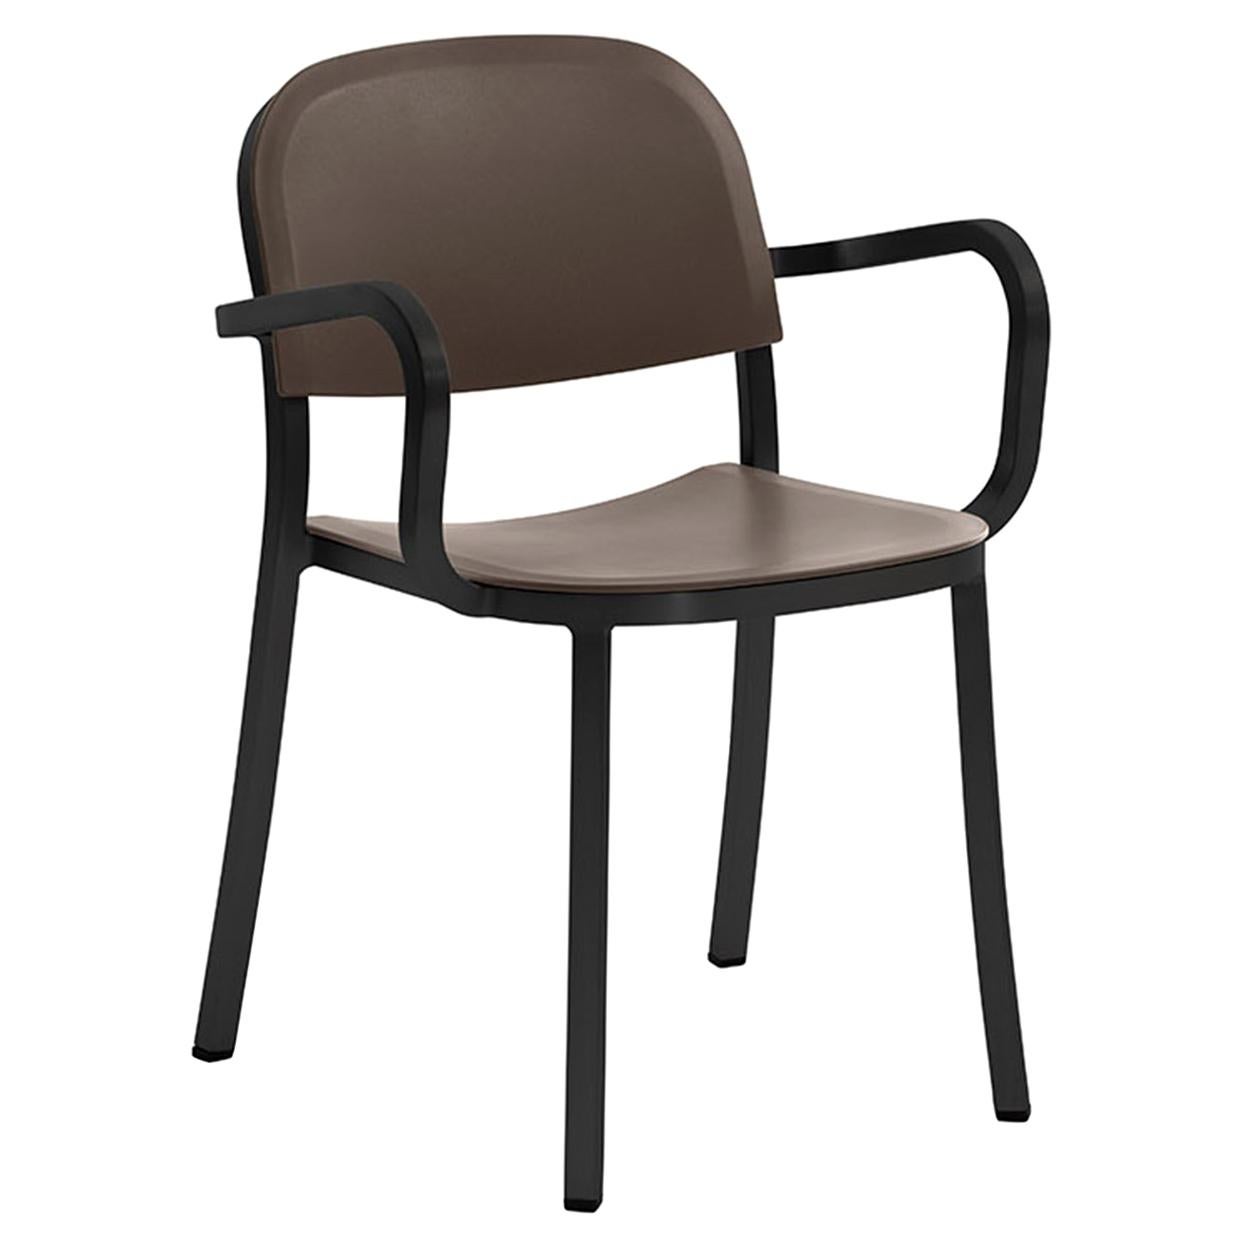 Emeco 1 Inch Armchair in Dark Powder-Coated Aluminum & Brown by Jasper Morrison For Sale